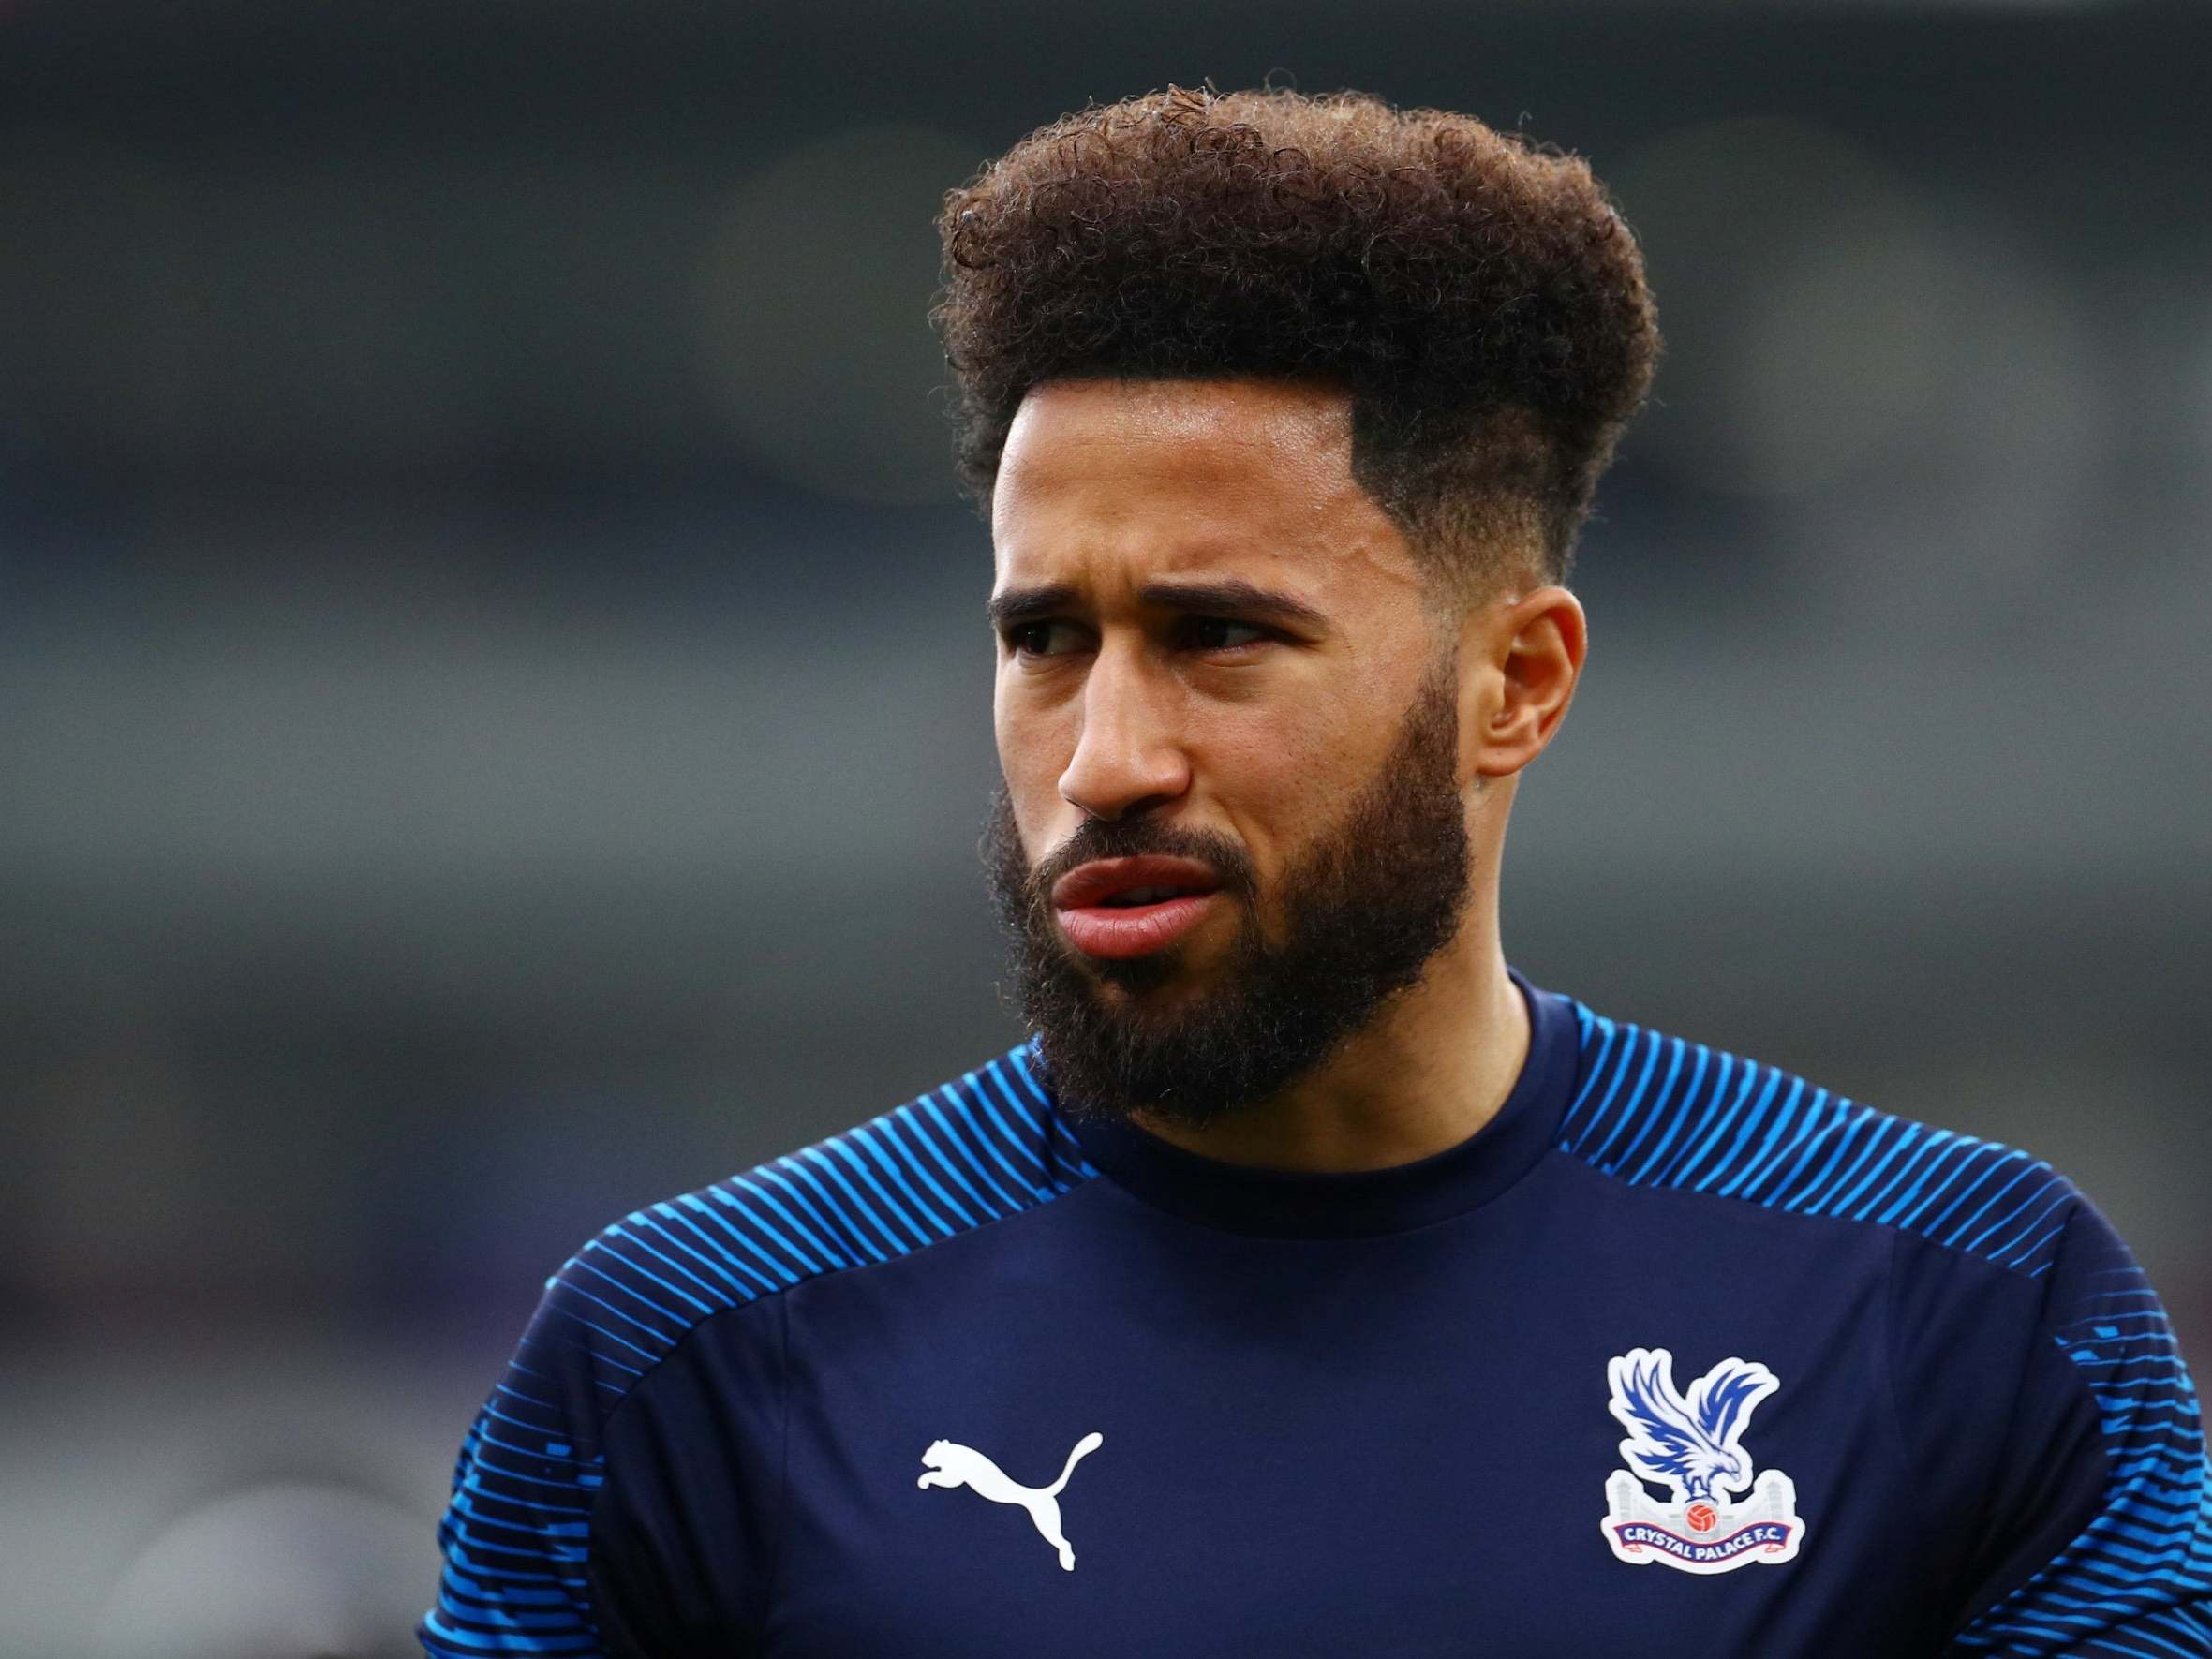 Premier League players 'desperate' to return to normal training, Crystal Palace's Andros Townsend insists